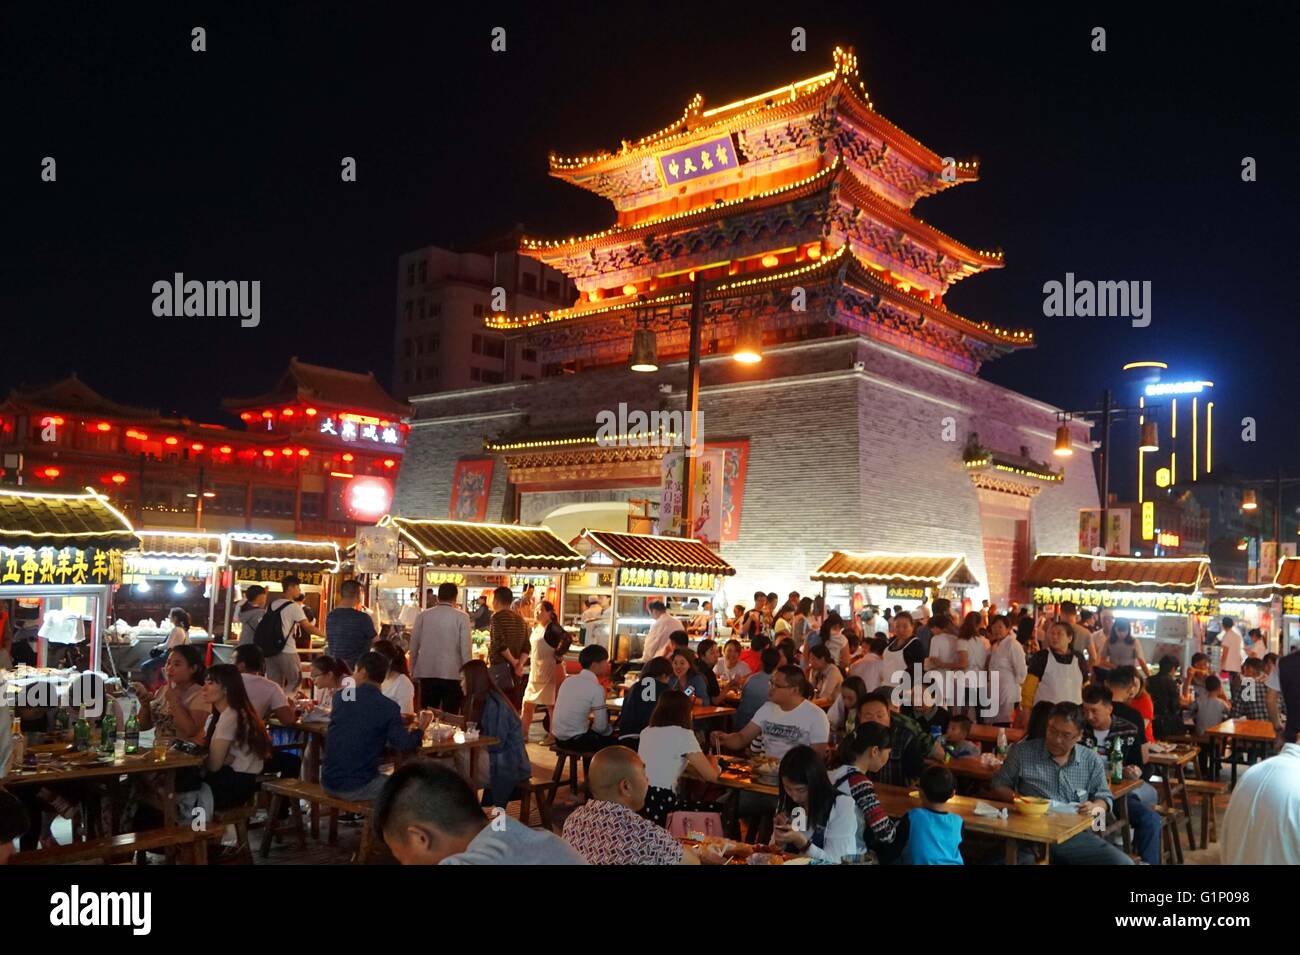 (160518) -- KAIFENG, May 18, 2016 (Xinhua) -- Photo taken on May 17, 2016 shows the scene of a night market next to a drum-tower in Kaifeng, central China's Henan Province. Kaifeng has a long history of its famous night market where a wide range of food specialities such as five-spice bread, steaming pie and dumplings are on sale. In the evening, Kaifeng's streets turn into restaurants while hundreds of vendors open their stands and begin selling food for people from the nearby cities, as the atmosphere is very appealing. Kaifeng is historically known as Daliang, Bianliang, Bianjing, Dongjing  Stock Photo